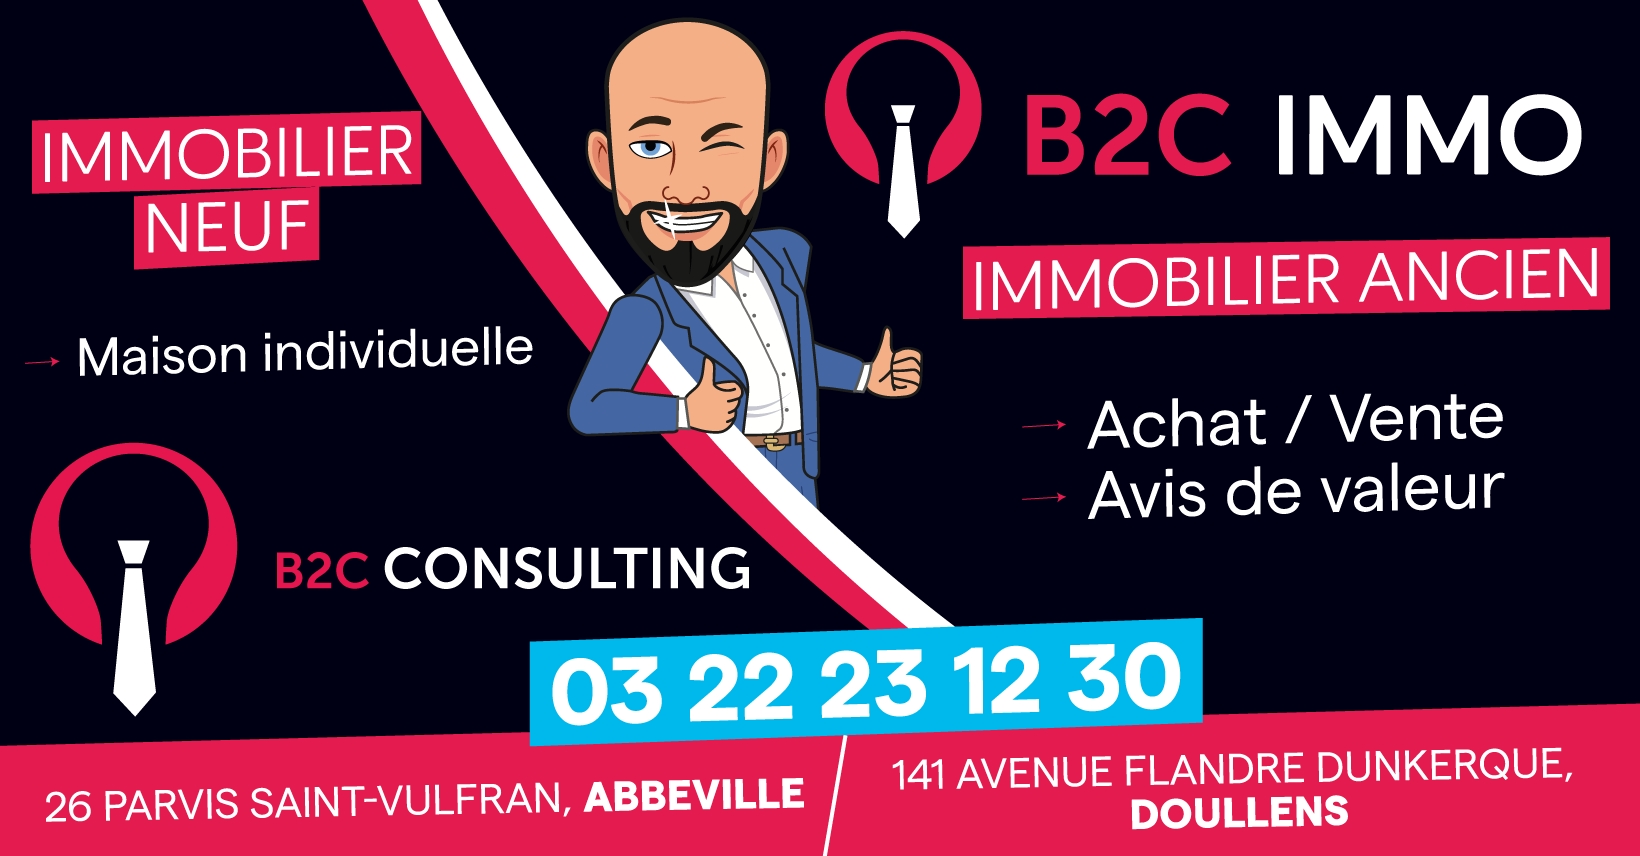 B2C IMMOBILIER